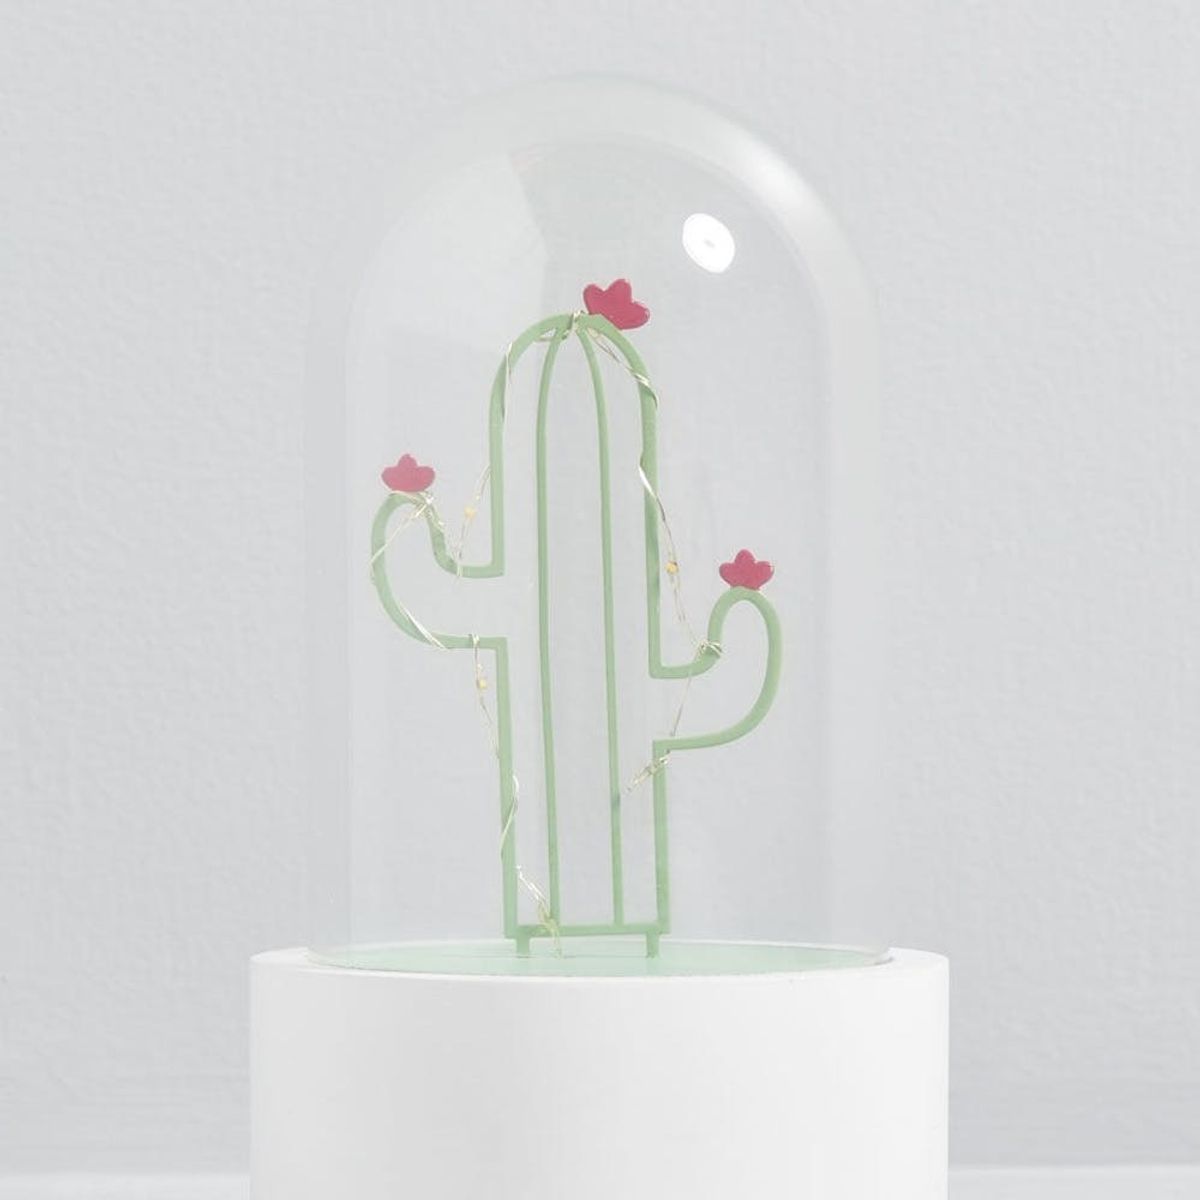 11 Sharp Gifts for People Who Can’t Get Enough Cacti